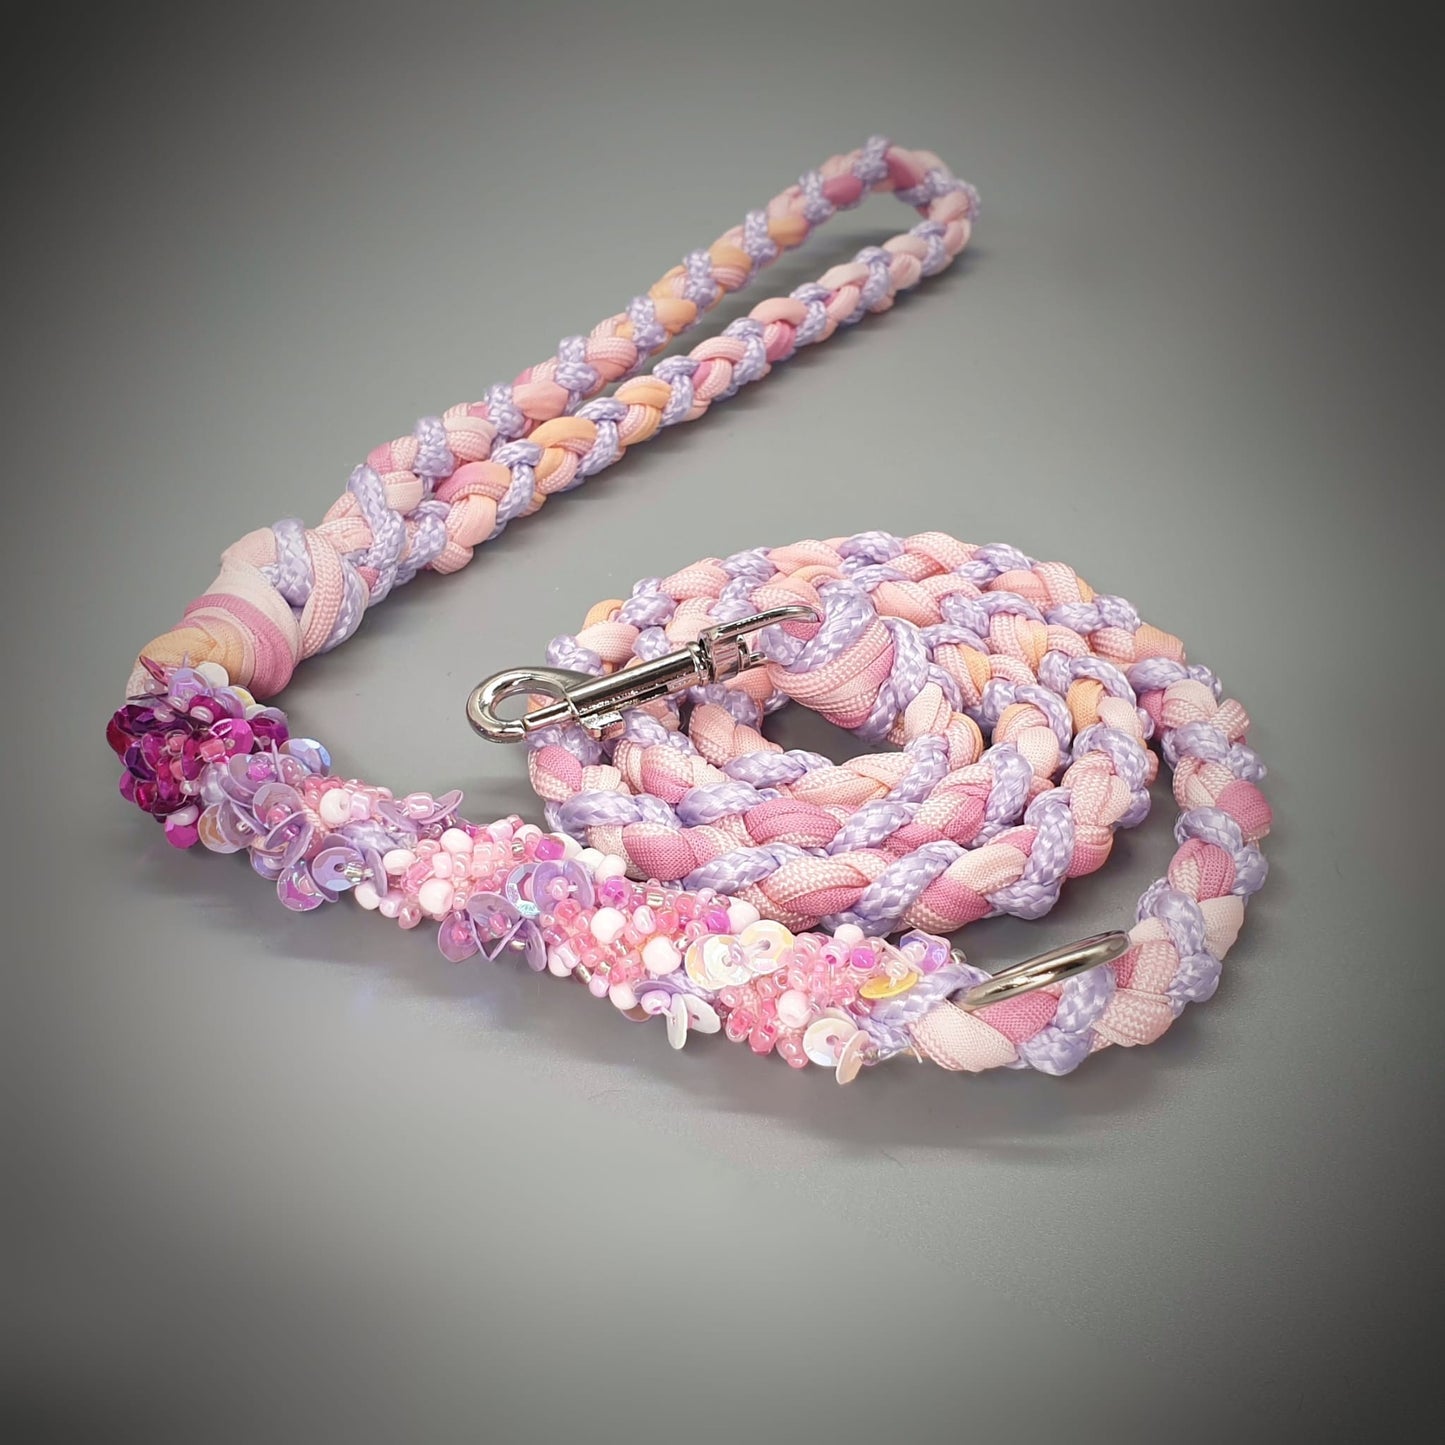 Exclusive hand-woven collar and leash set with application of pallets and beads. Luxury accessories for your Pet.